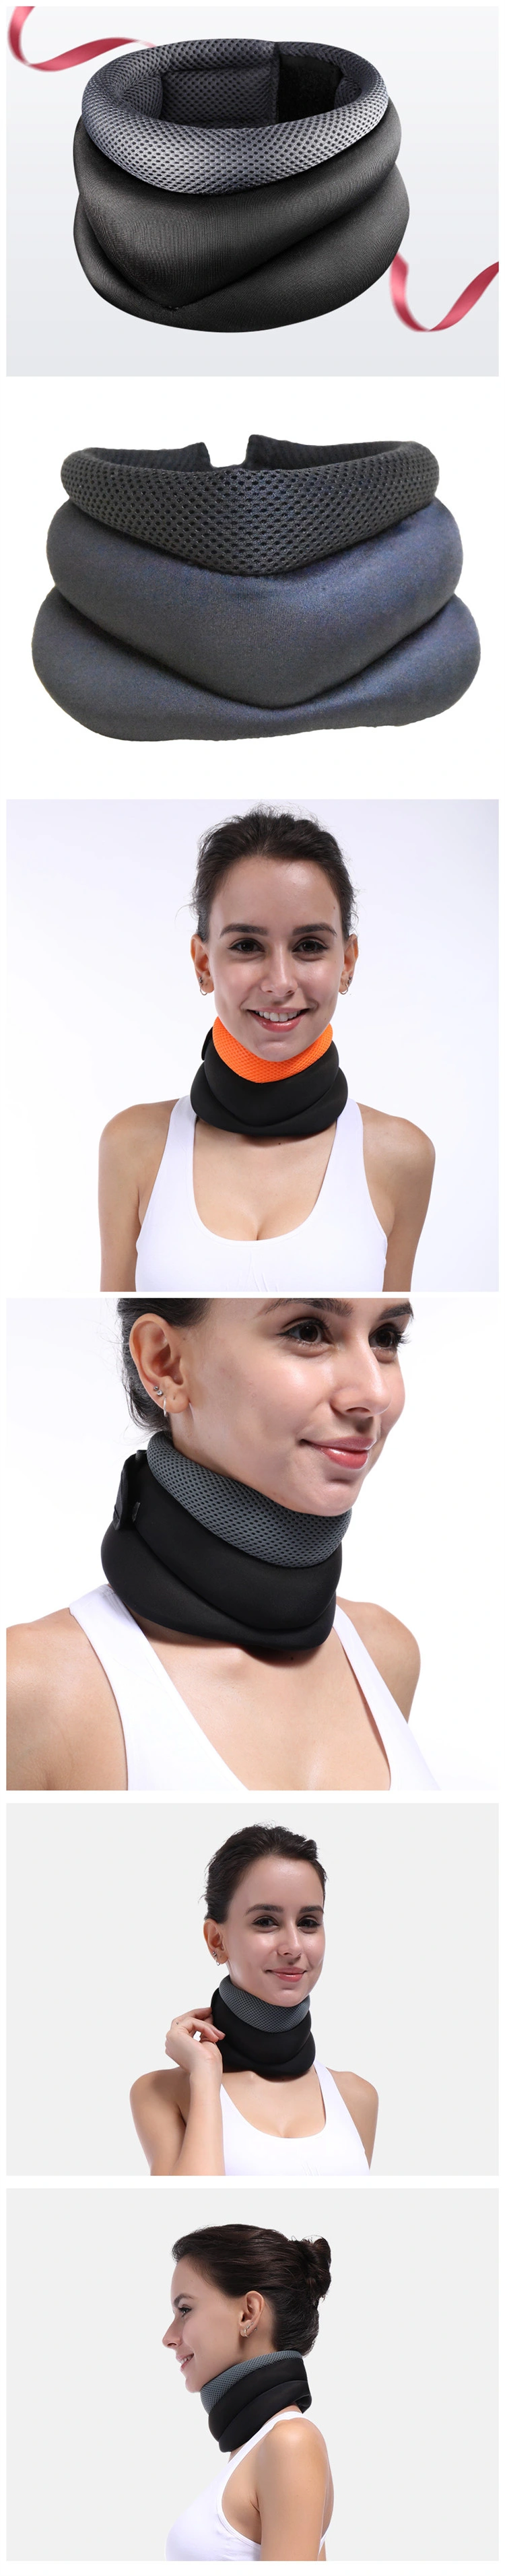 Amazon Hot Sale Adjustable Soft Cervical Spine Orthotics Pain Relieves Neck Support Cervical Traction Device